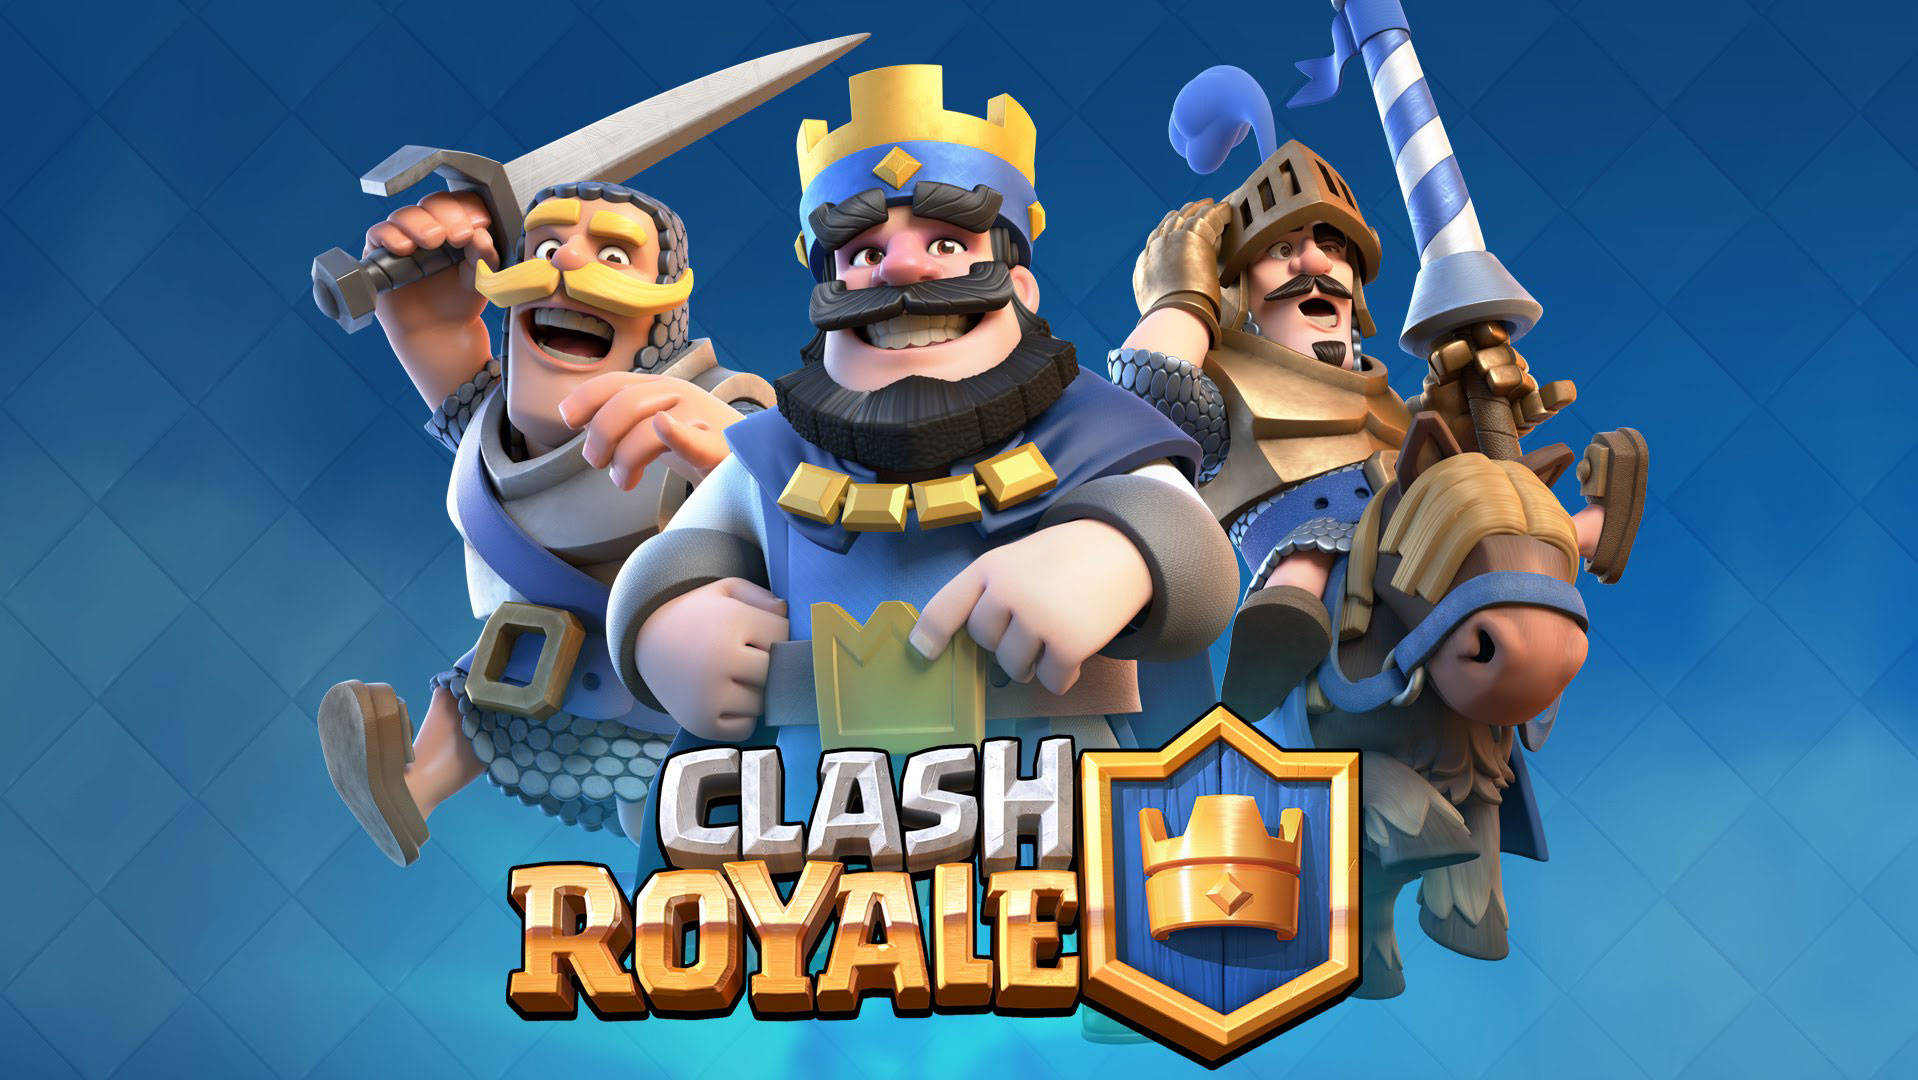 Clash Royale Characters